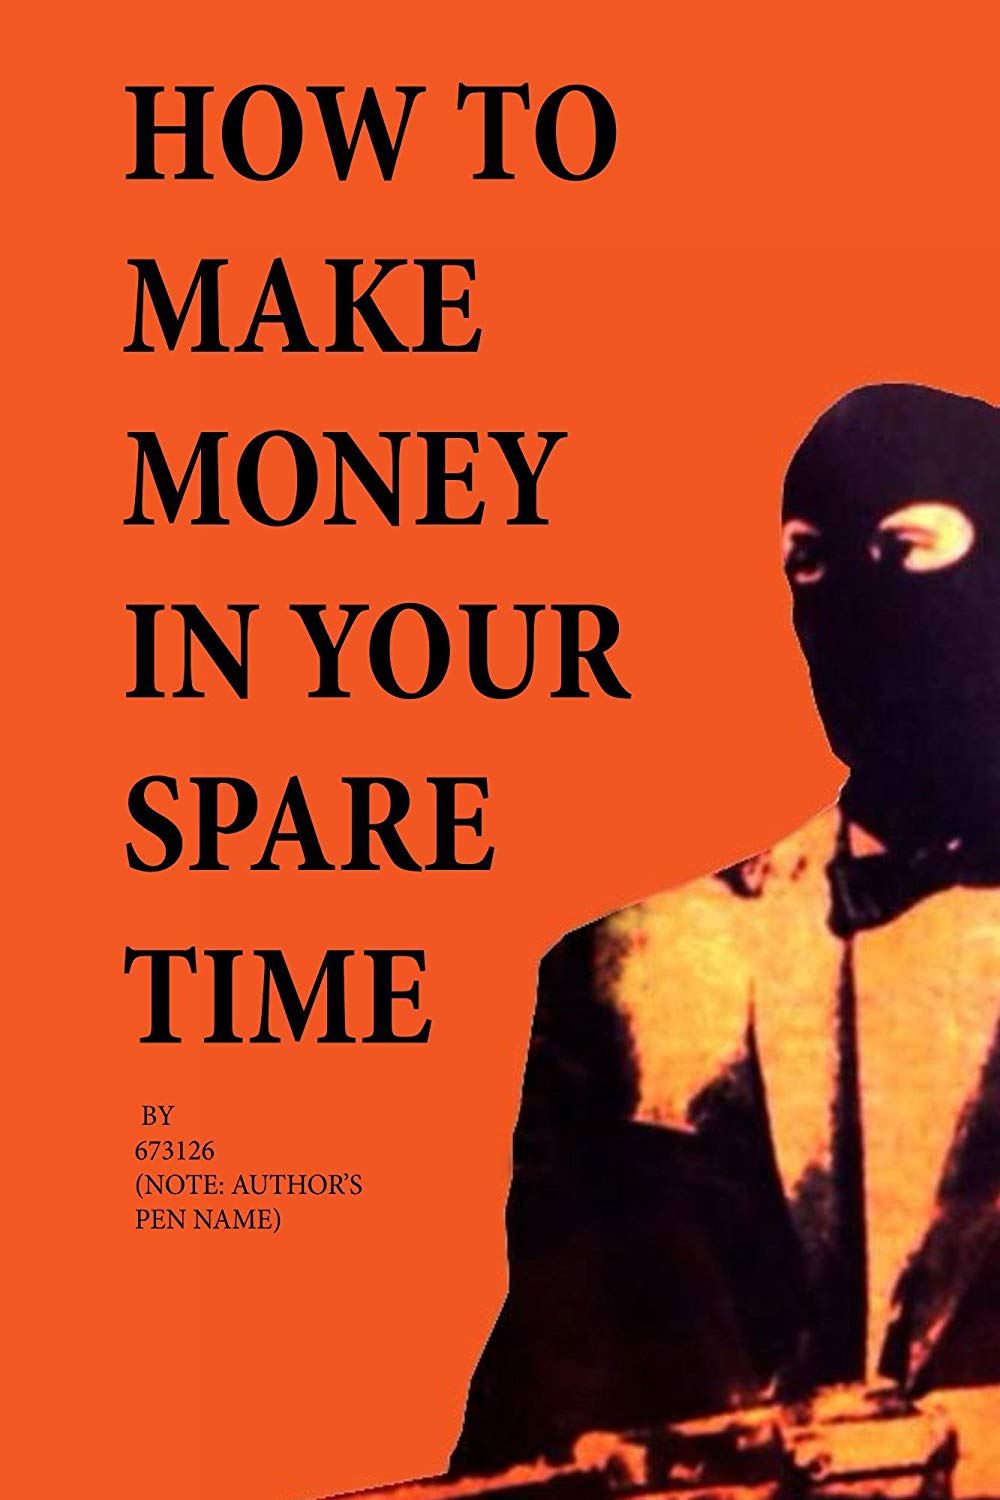 'How to Make Money in Your Spare Time' by 673126 & J M.R. Rice